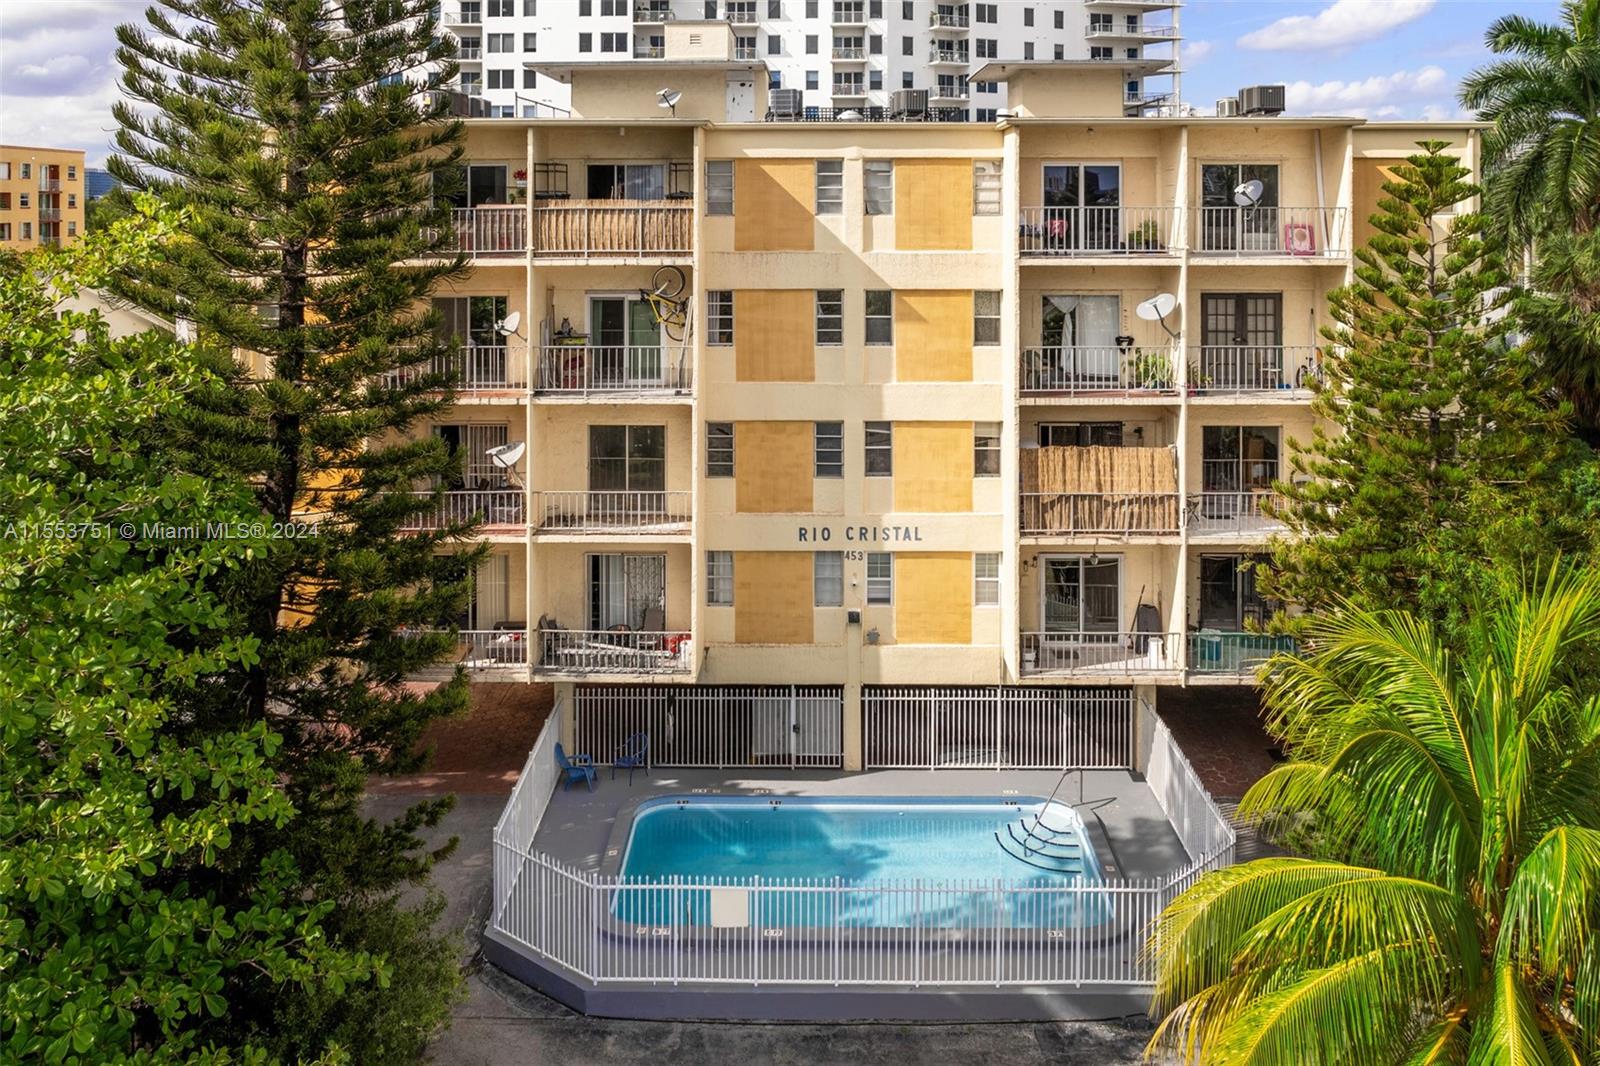 Introducing a recently renovated 2BD/1BA at Rio Cristal in Little Havana near the Miami River, Downtown, and Brickell. Current owner updated the unit in 2022, including new appliances, cabinets, and counters in kitchen, new bathroom, dry wall, and new sliding door to balcony. AC compressor replaced in 2024. Community is gated, with a pool, assigned and guest parking. Laundry machines on each floor. Unit is great for first time home buyers or investors. Tenant occupied.

HOA is $521. No current special assessments. Property taxes represent no exemptions.